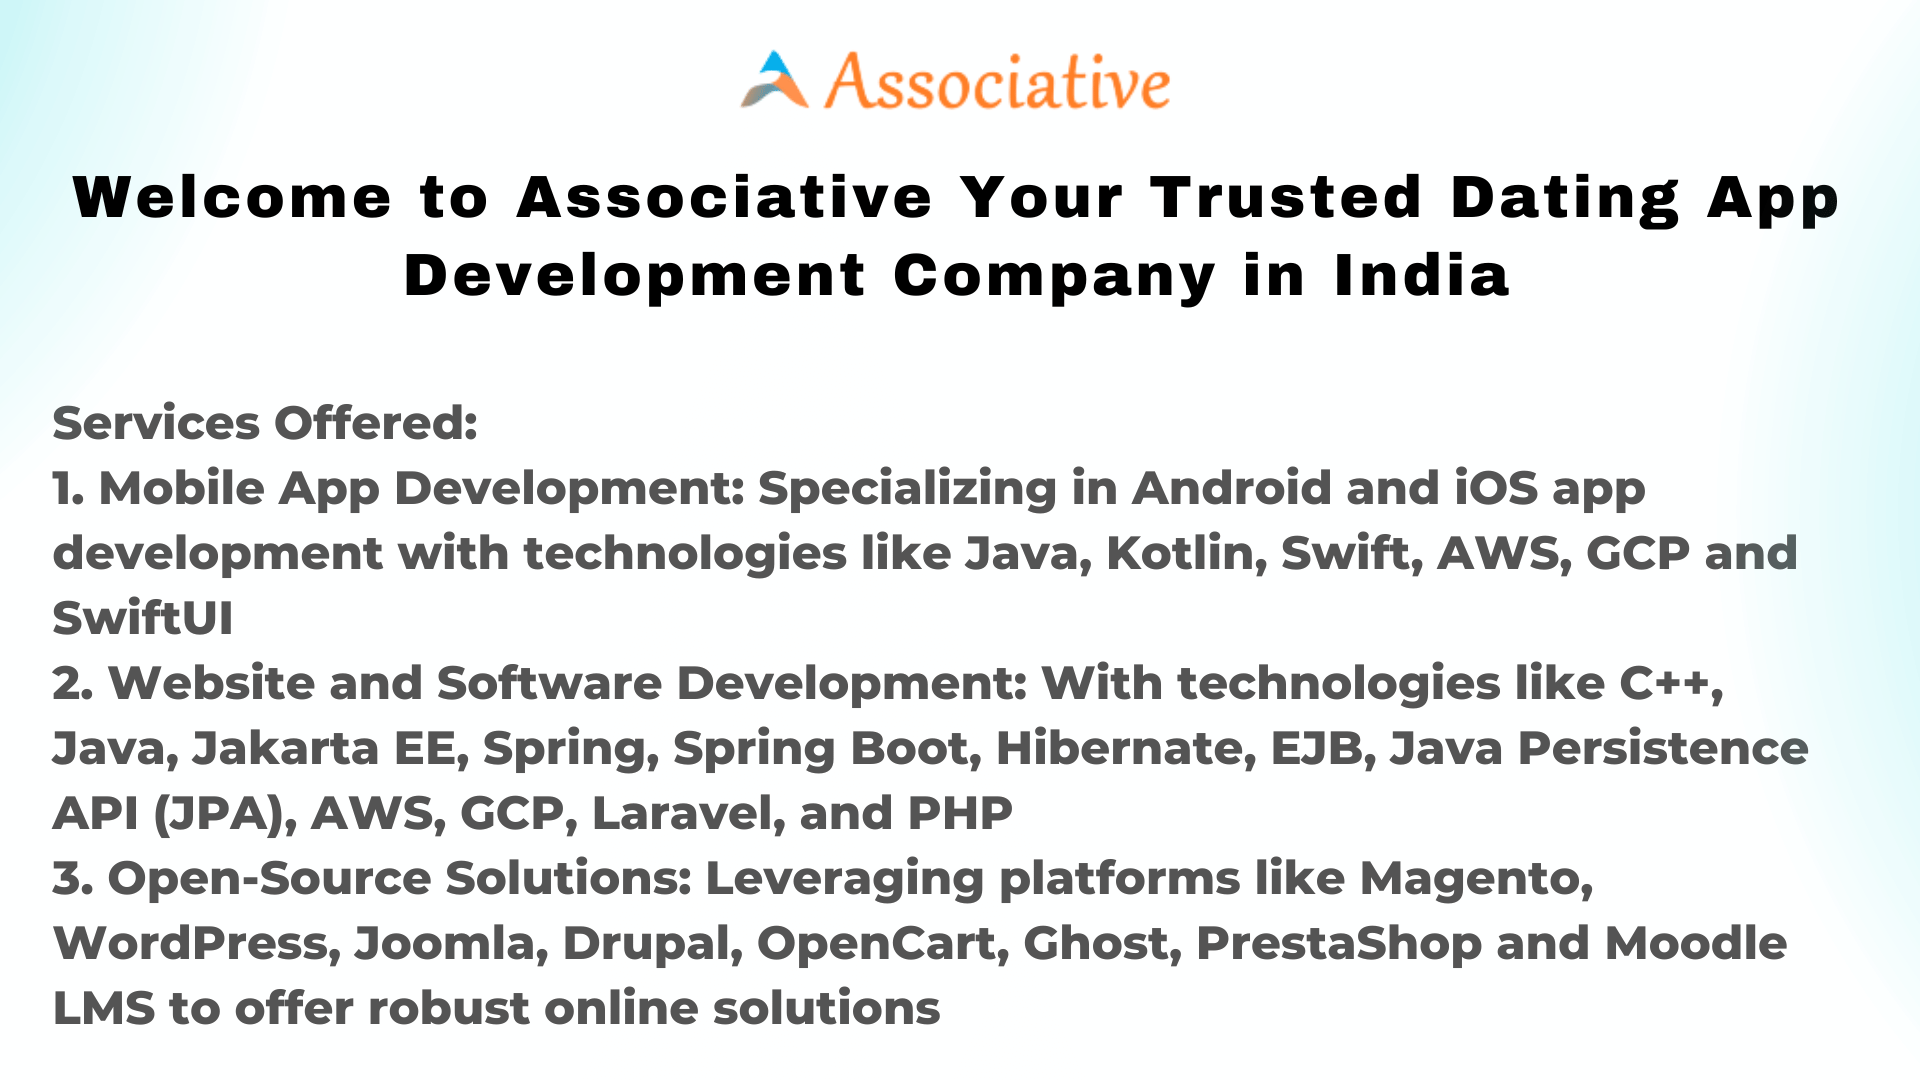 Welcome to Associative Your Trusted Dating App Development Company in India